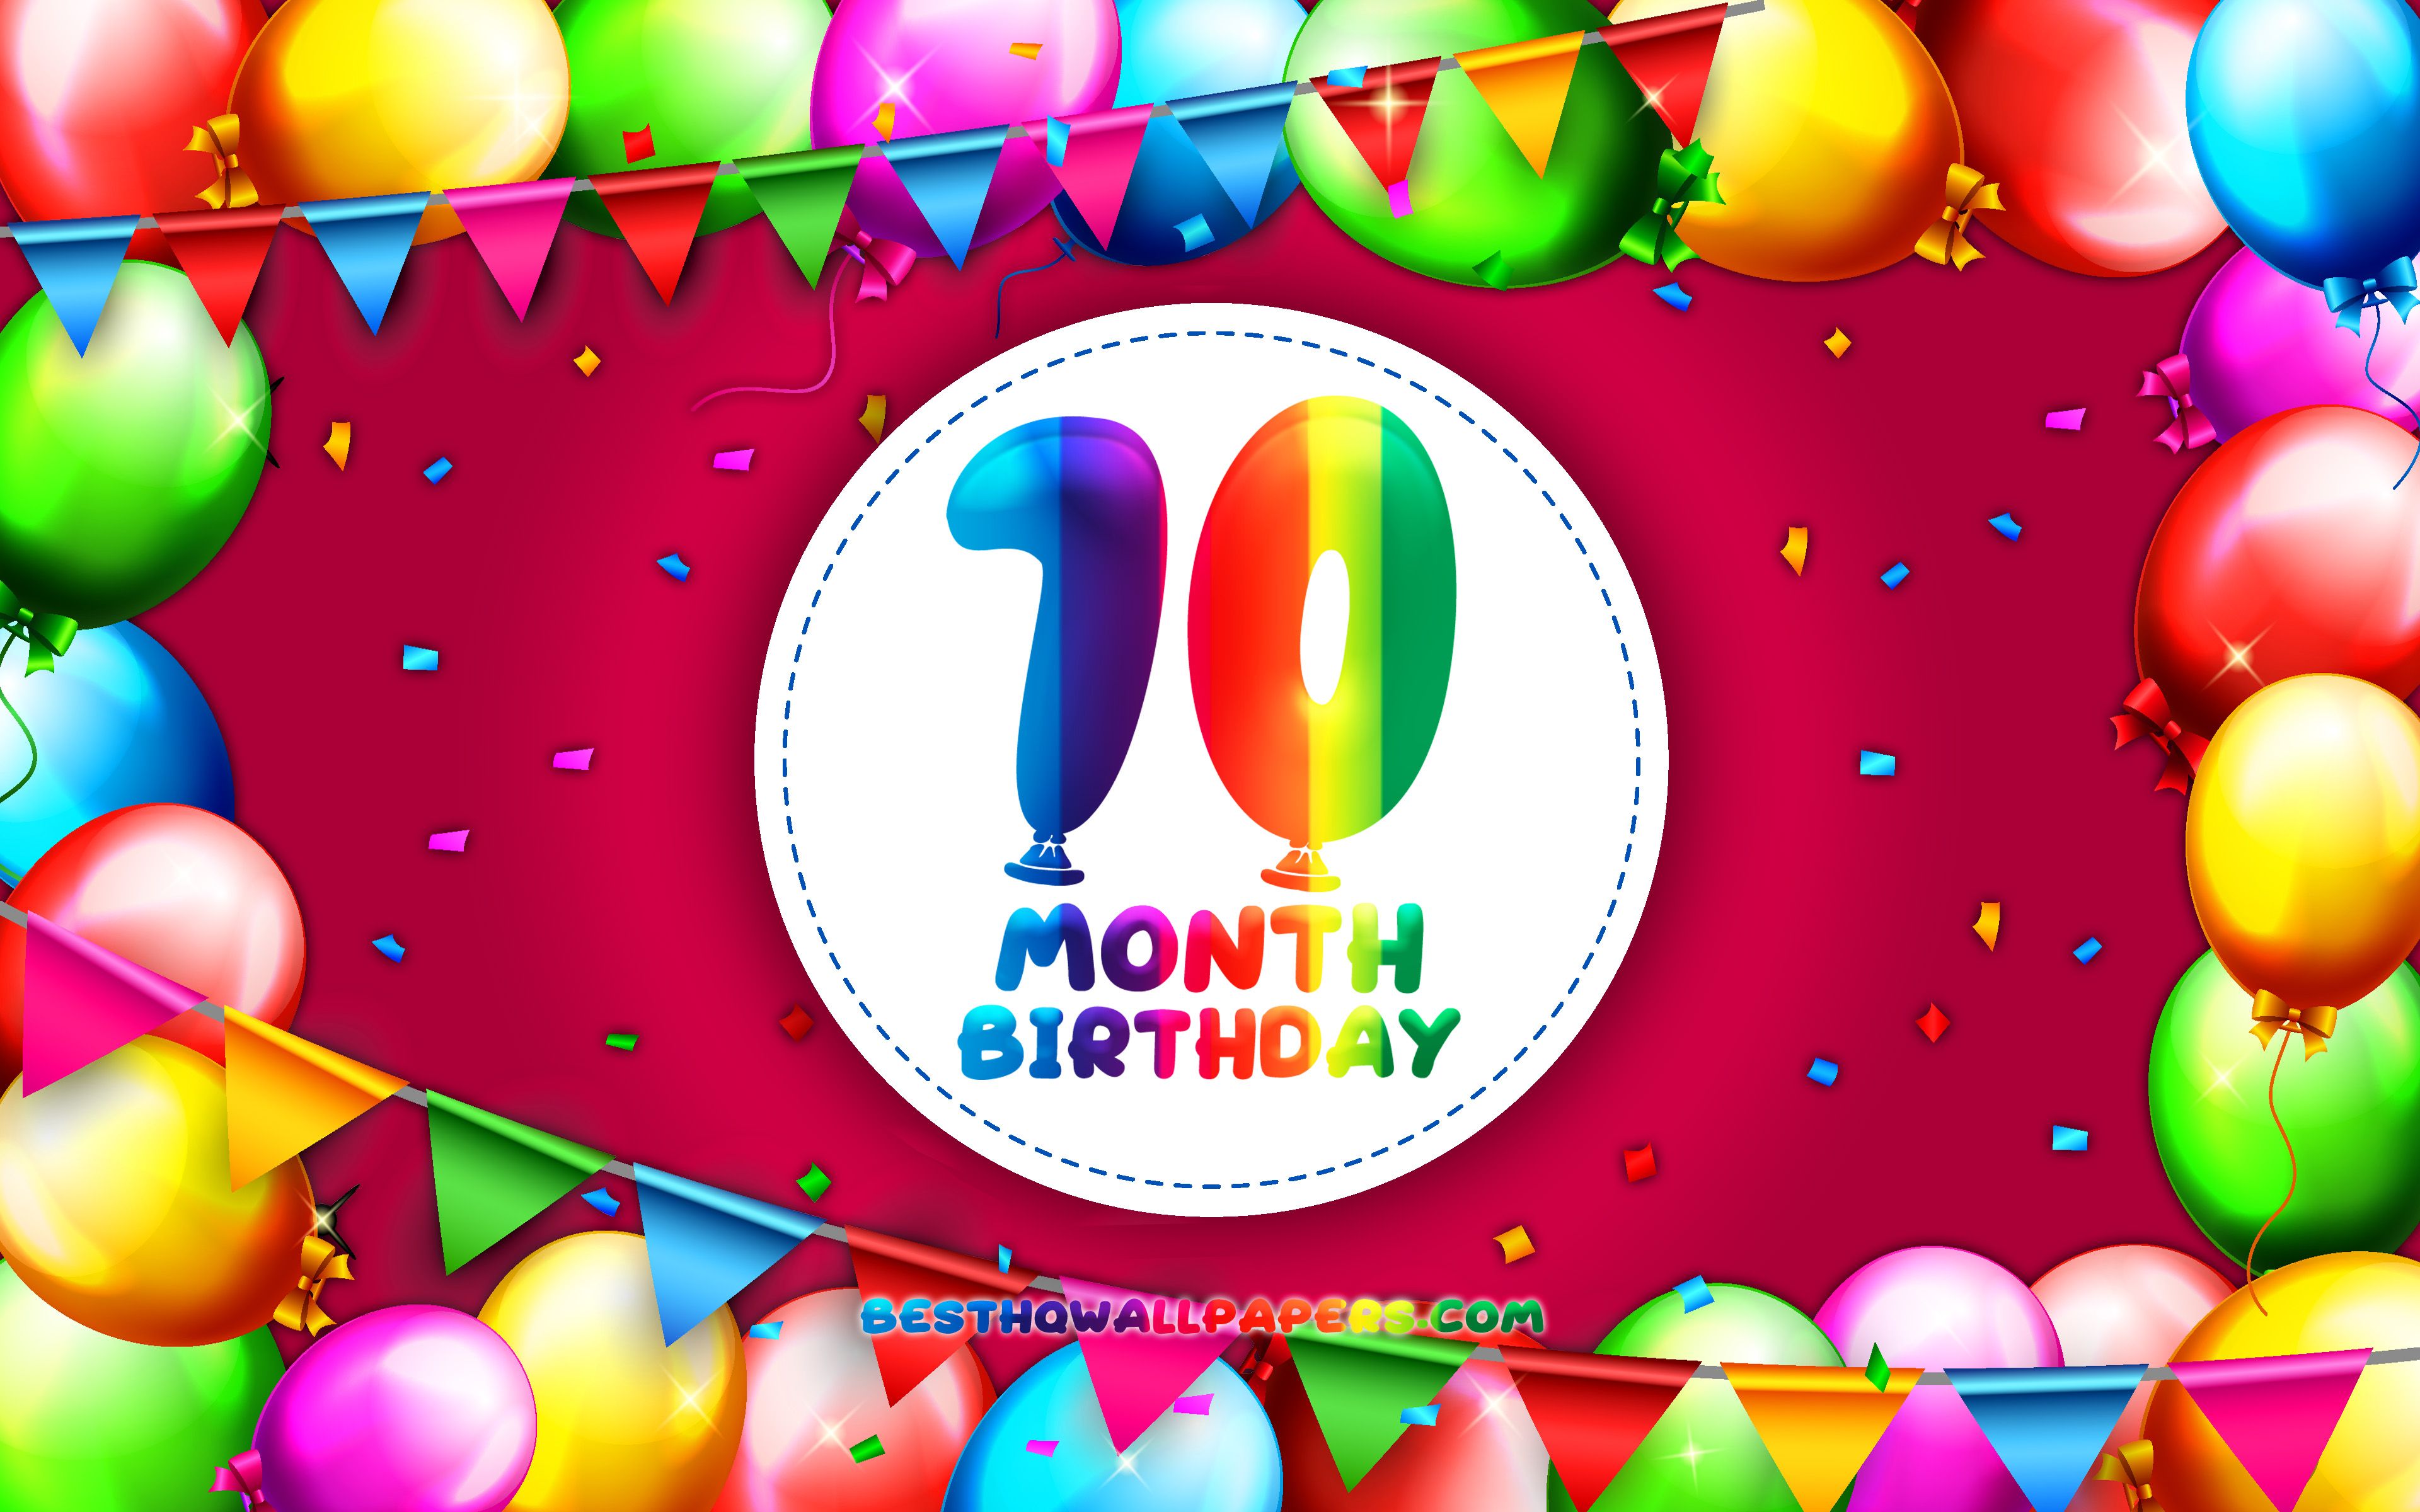 Download wallpaper Happy 10th Month birthday, 4k, colorful